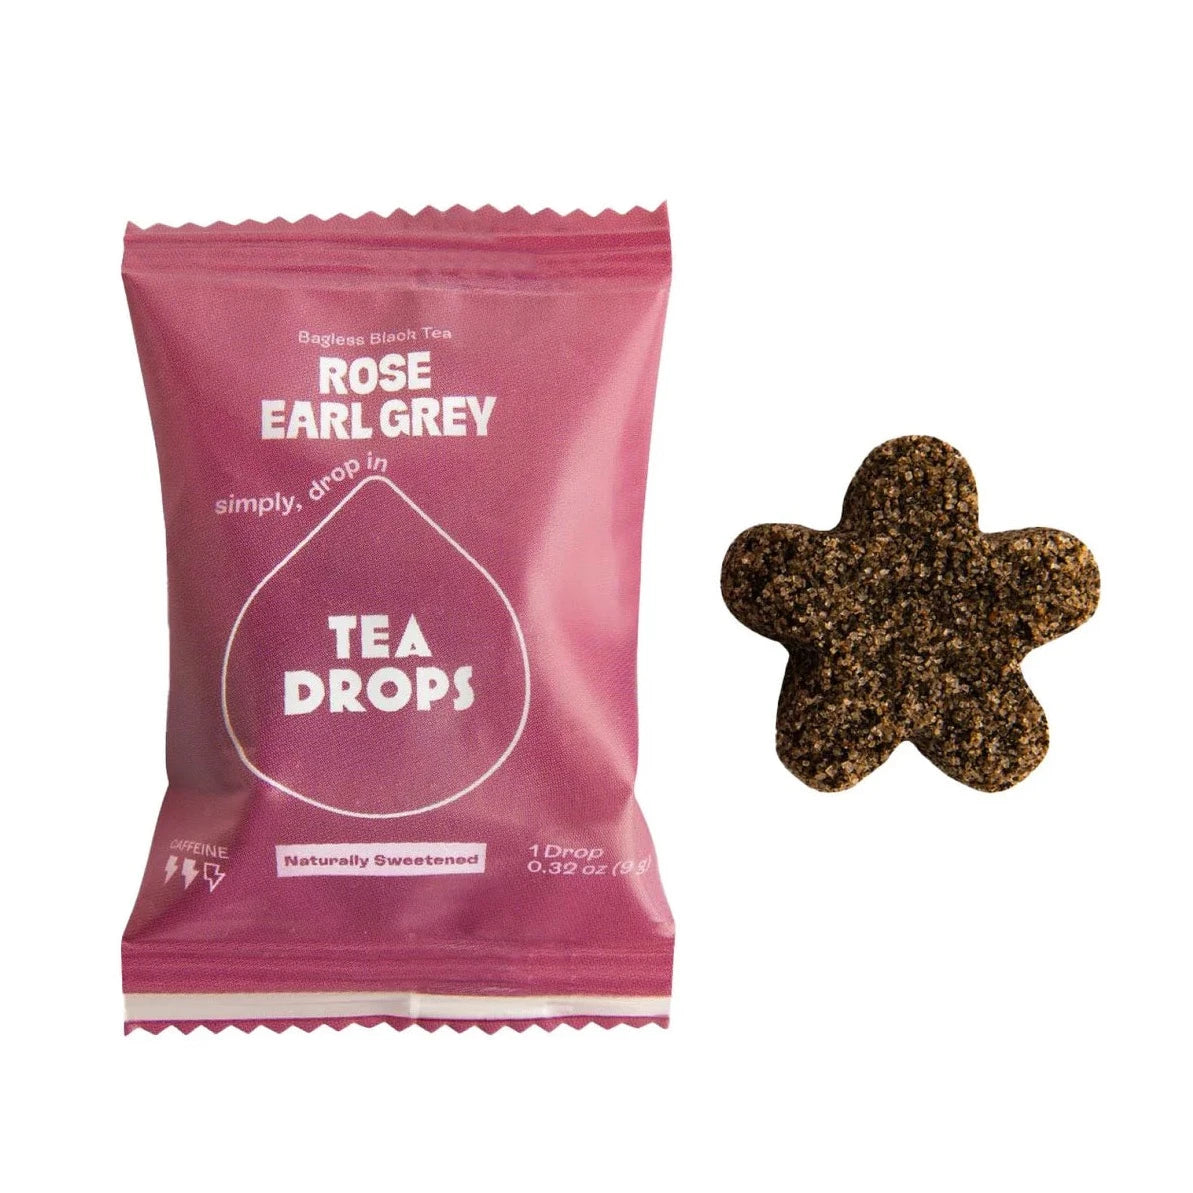 purple bag with white text for tea drop. star shaped tea drop next to it